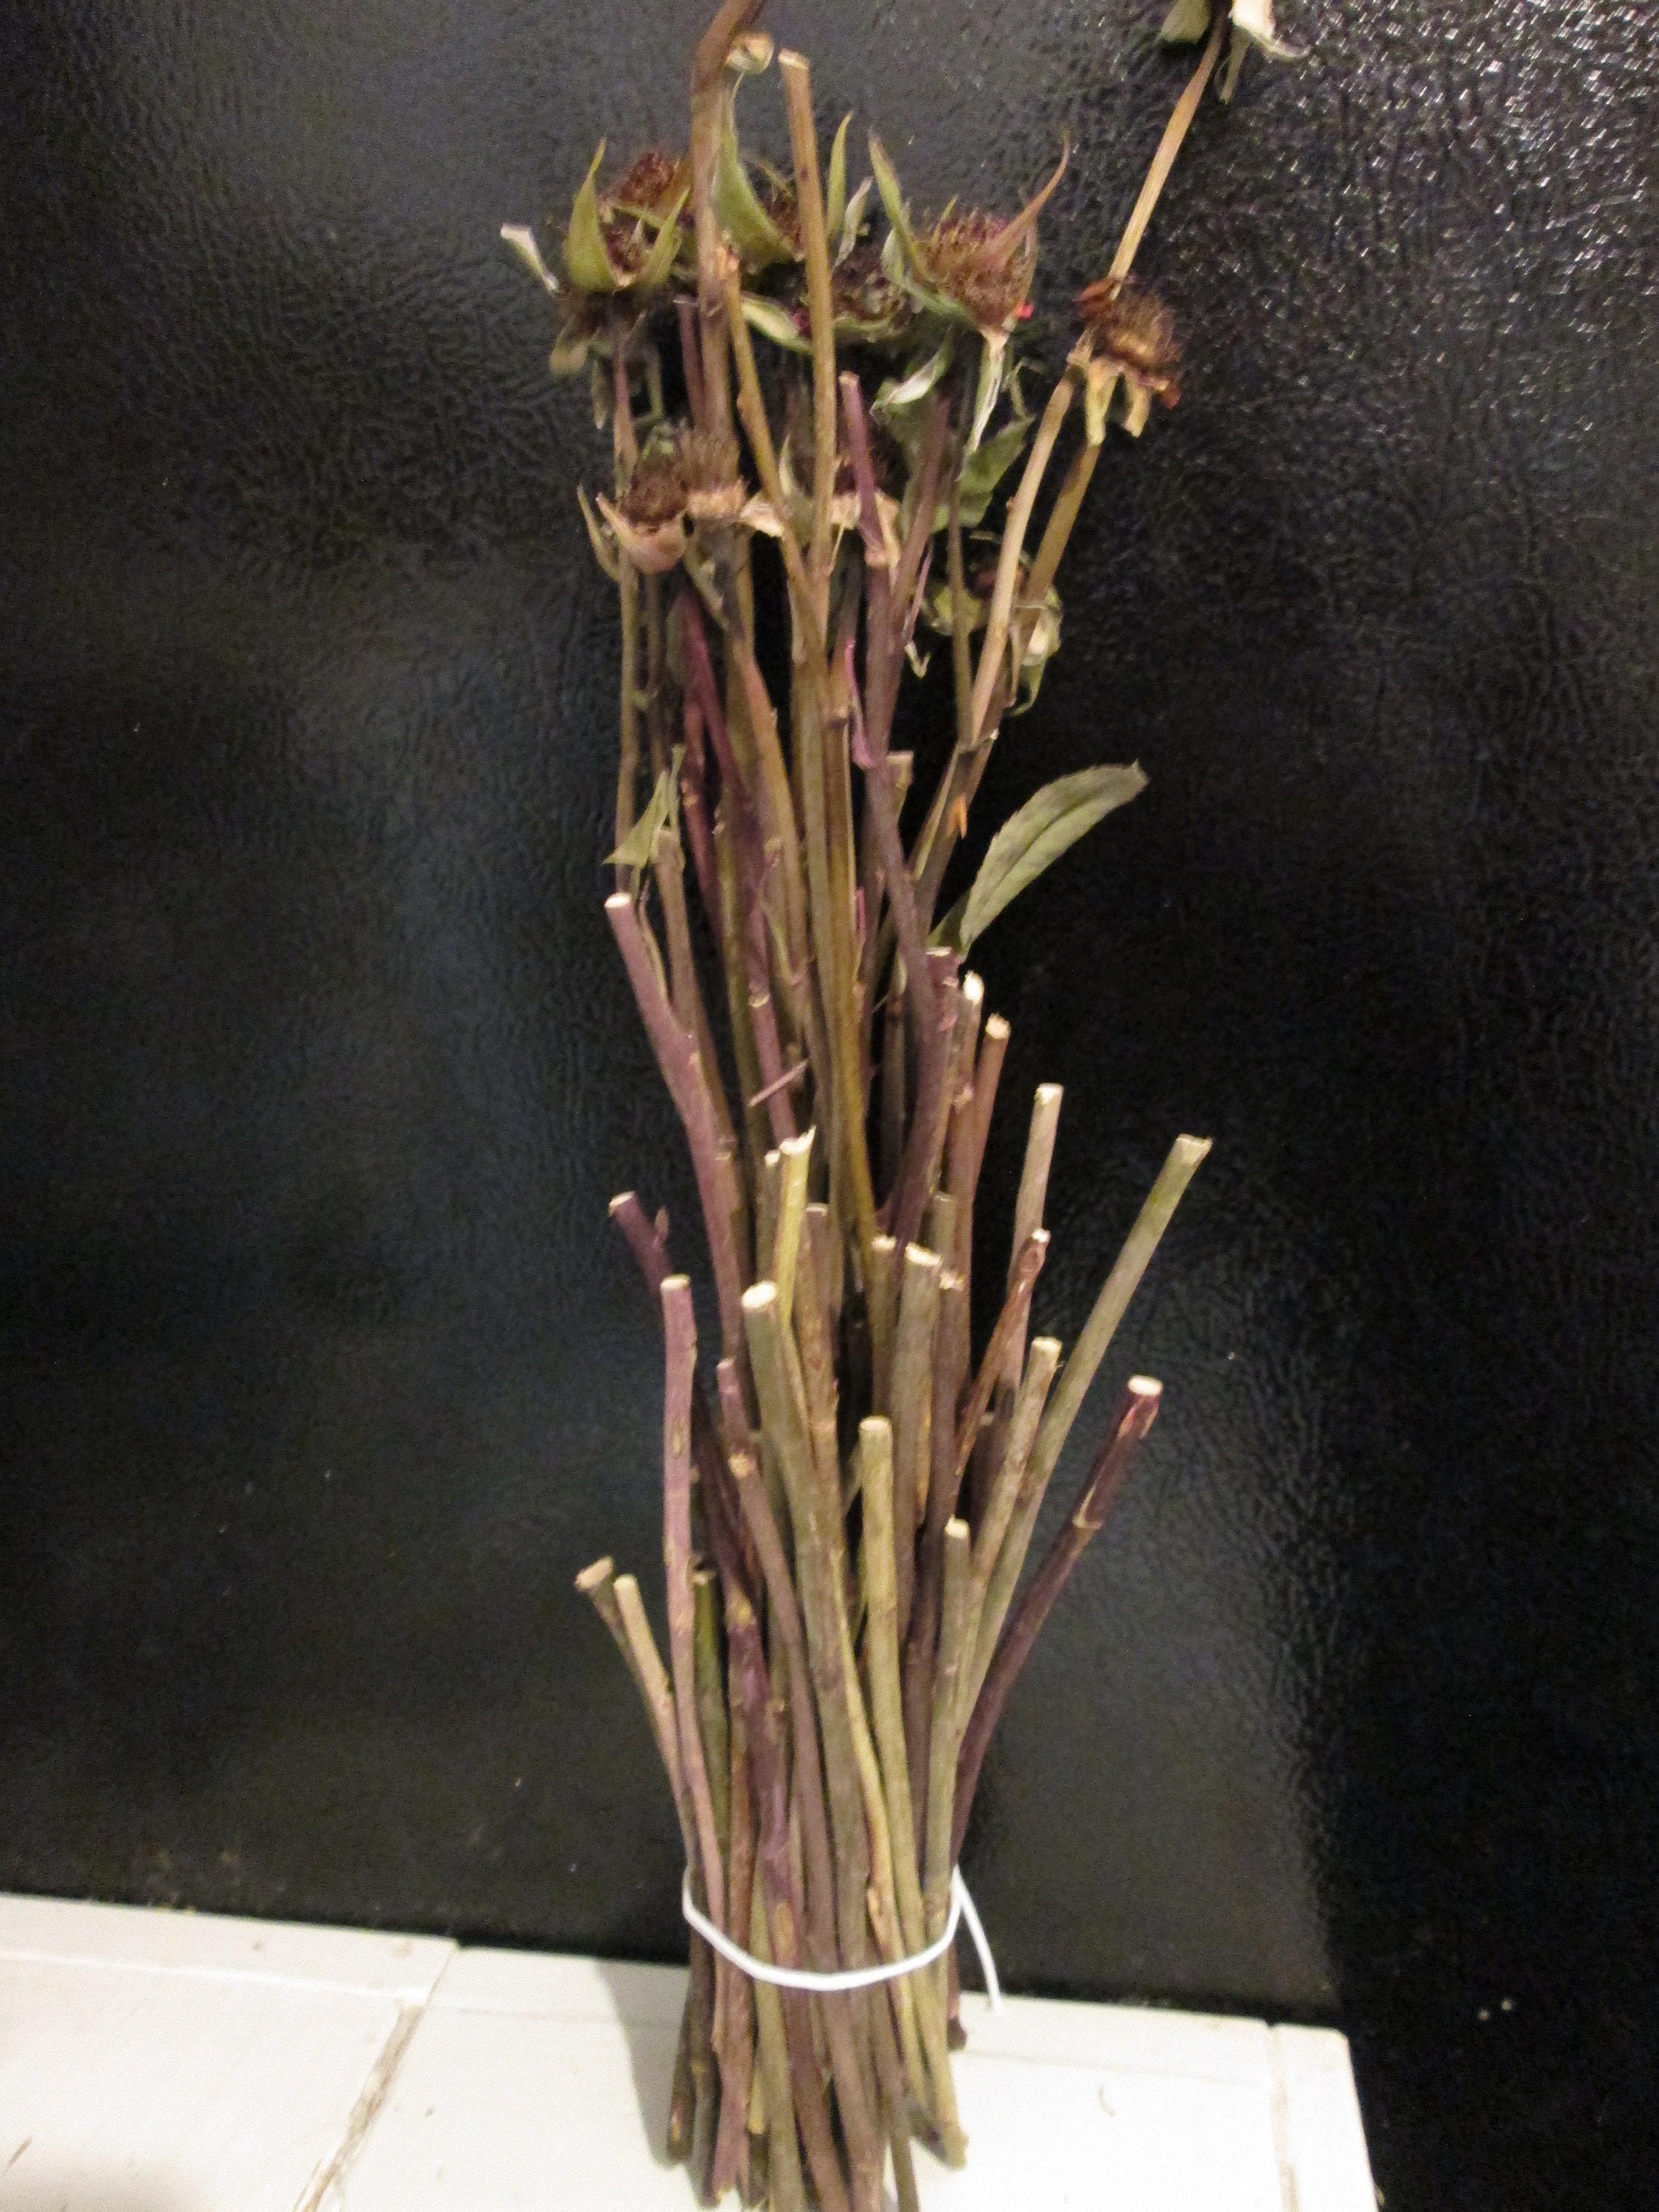 Thorn Branches, Dried Rose Stems for Vases and Home Decor, Branches, Dried  Flowers, Sticks, Vase Decor, Thorns, Easter, Valentines Day 